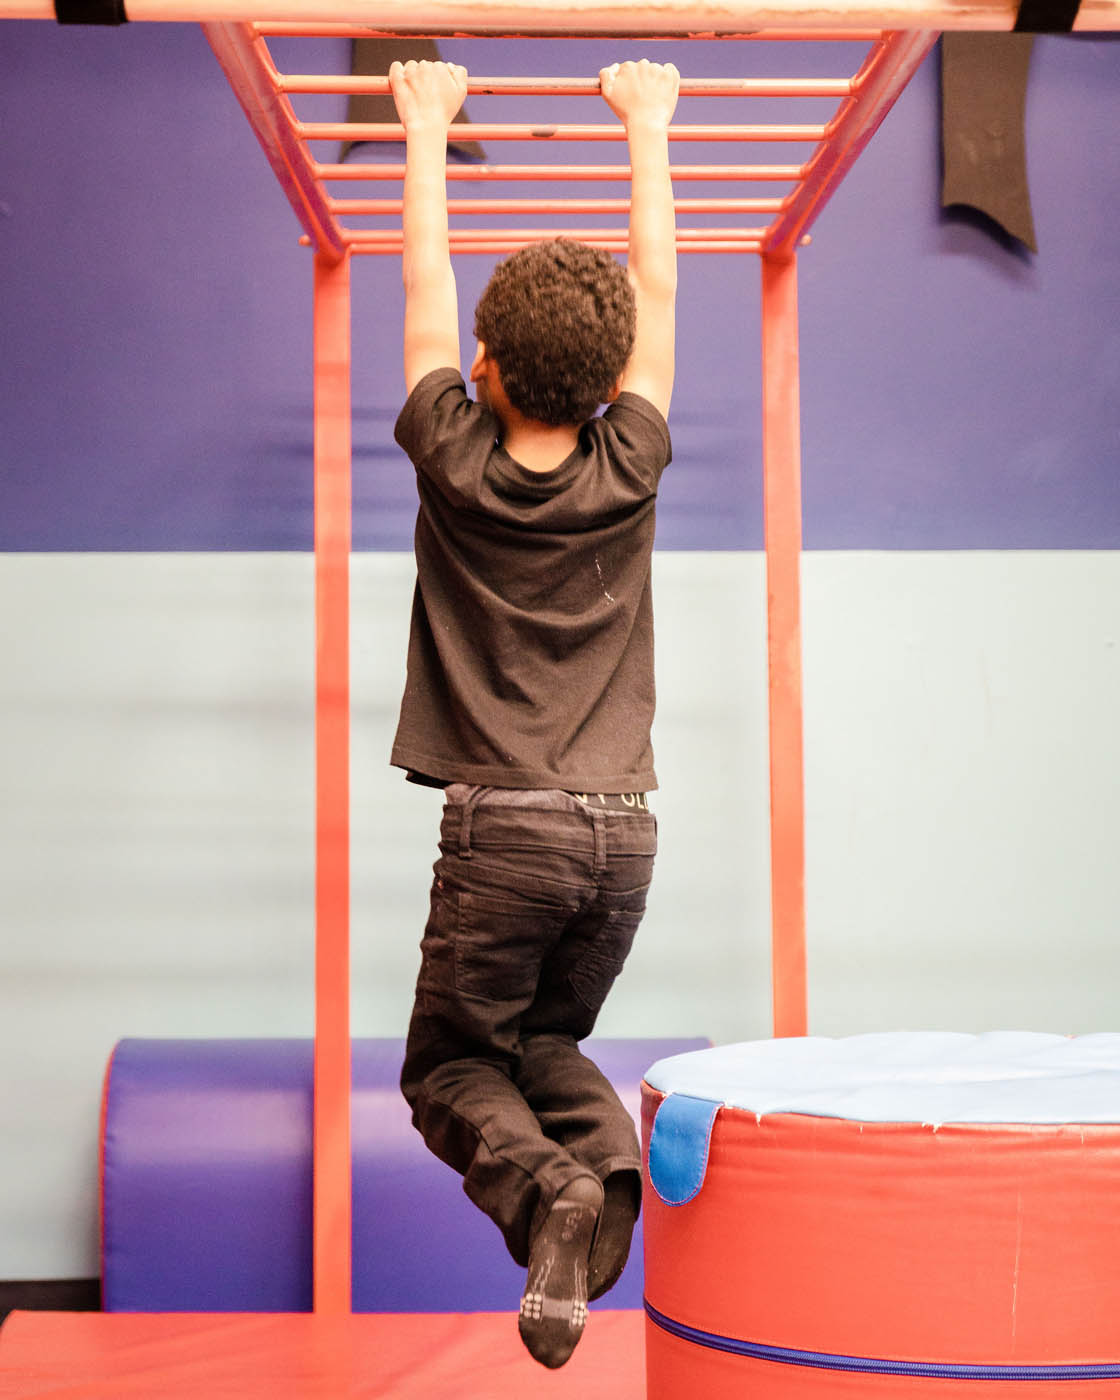 A little boy hanging on monkey bars, contact us today about our baby groups in Charlotte, NC.